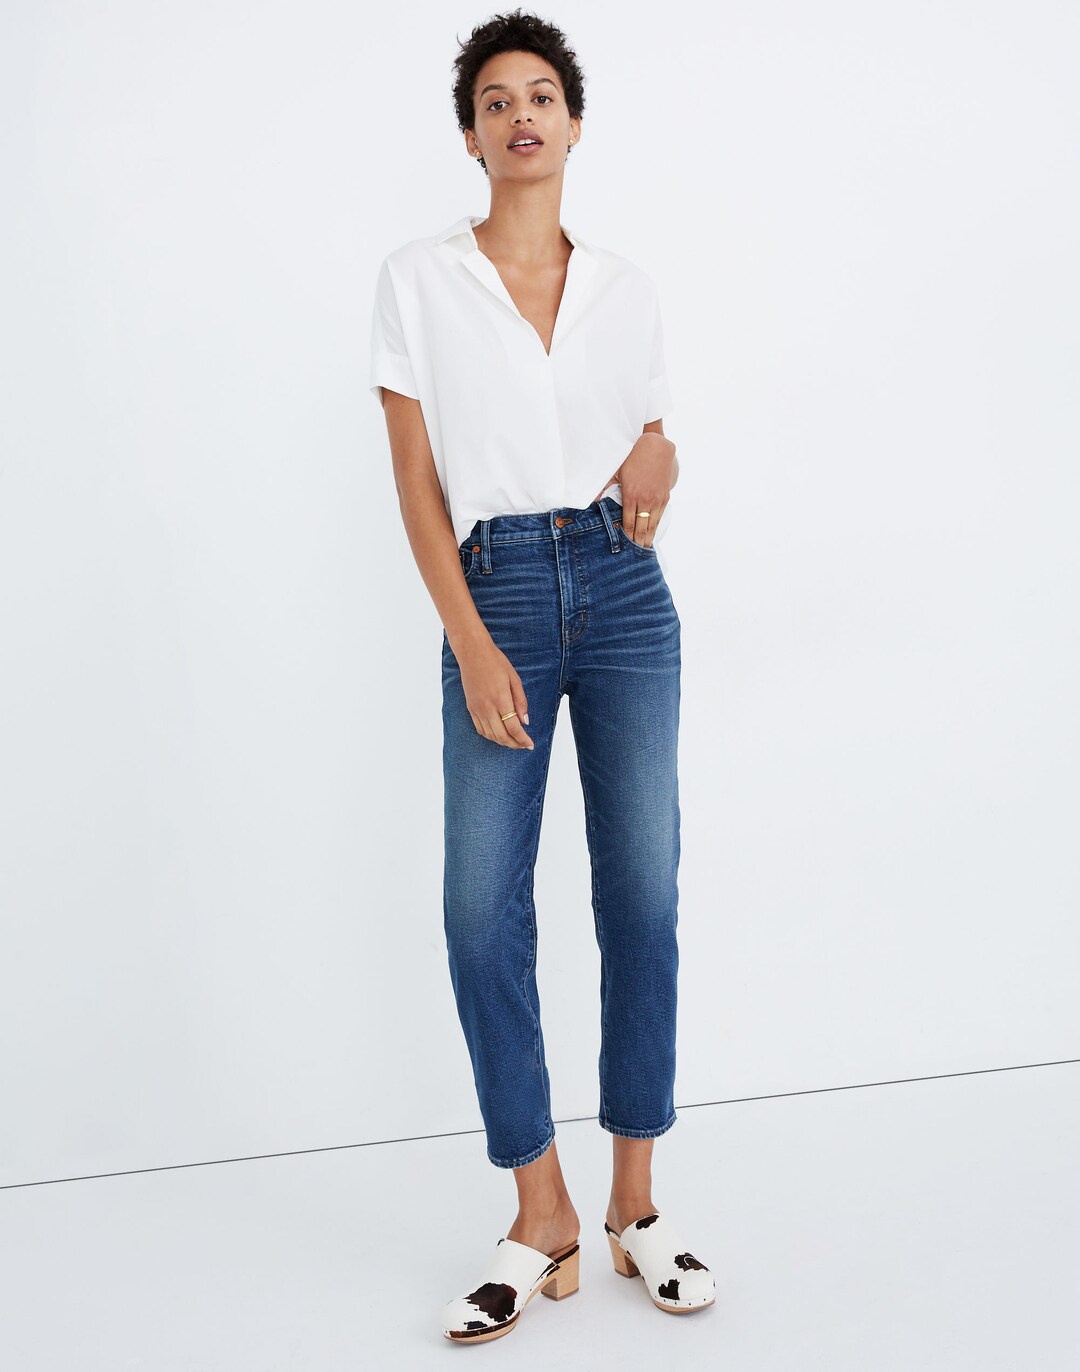 Women's Mid-Rise Straight Jeans in Carsondale Wash | Madewell